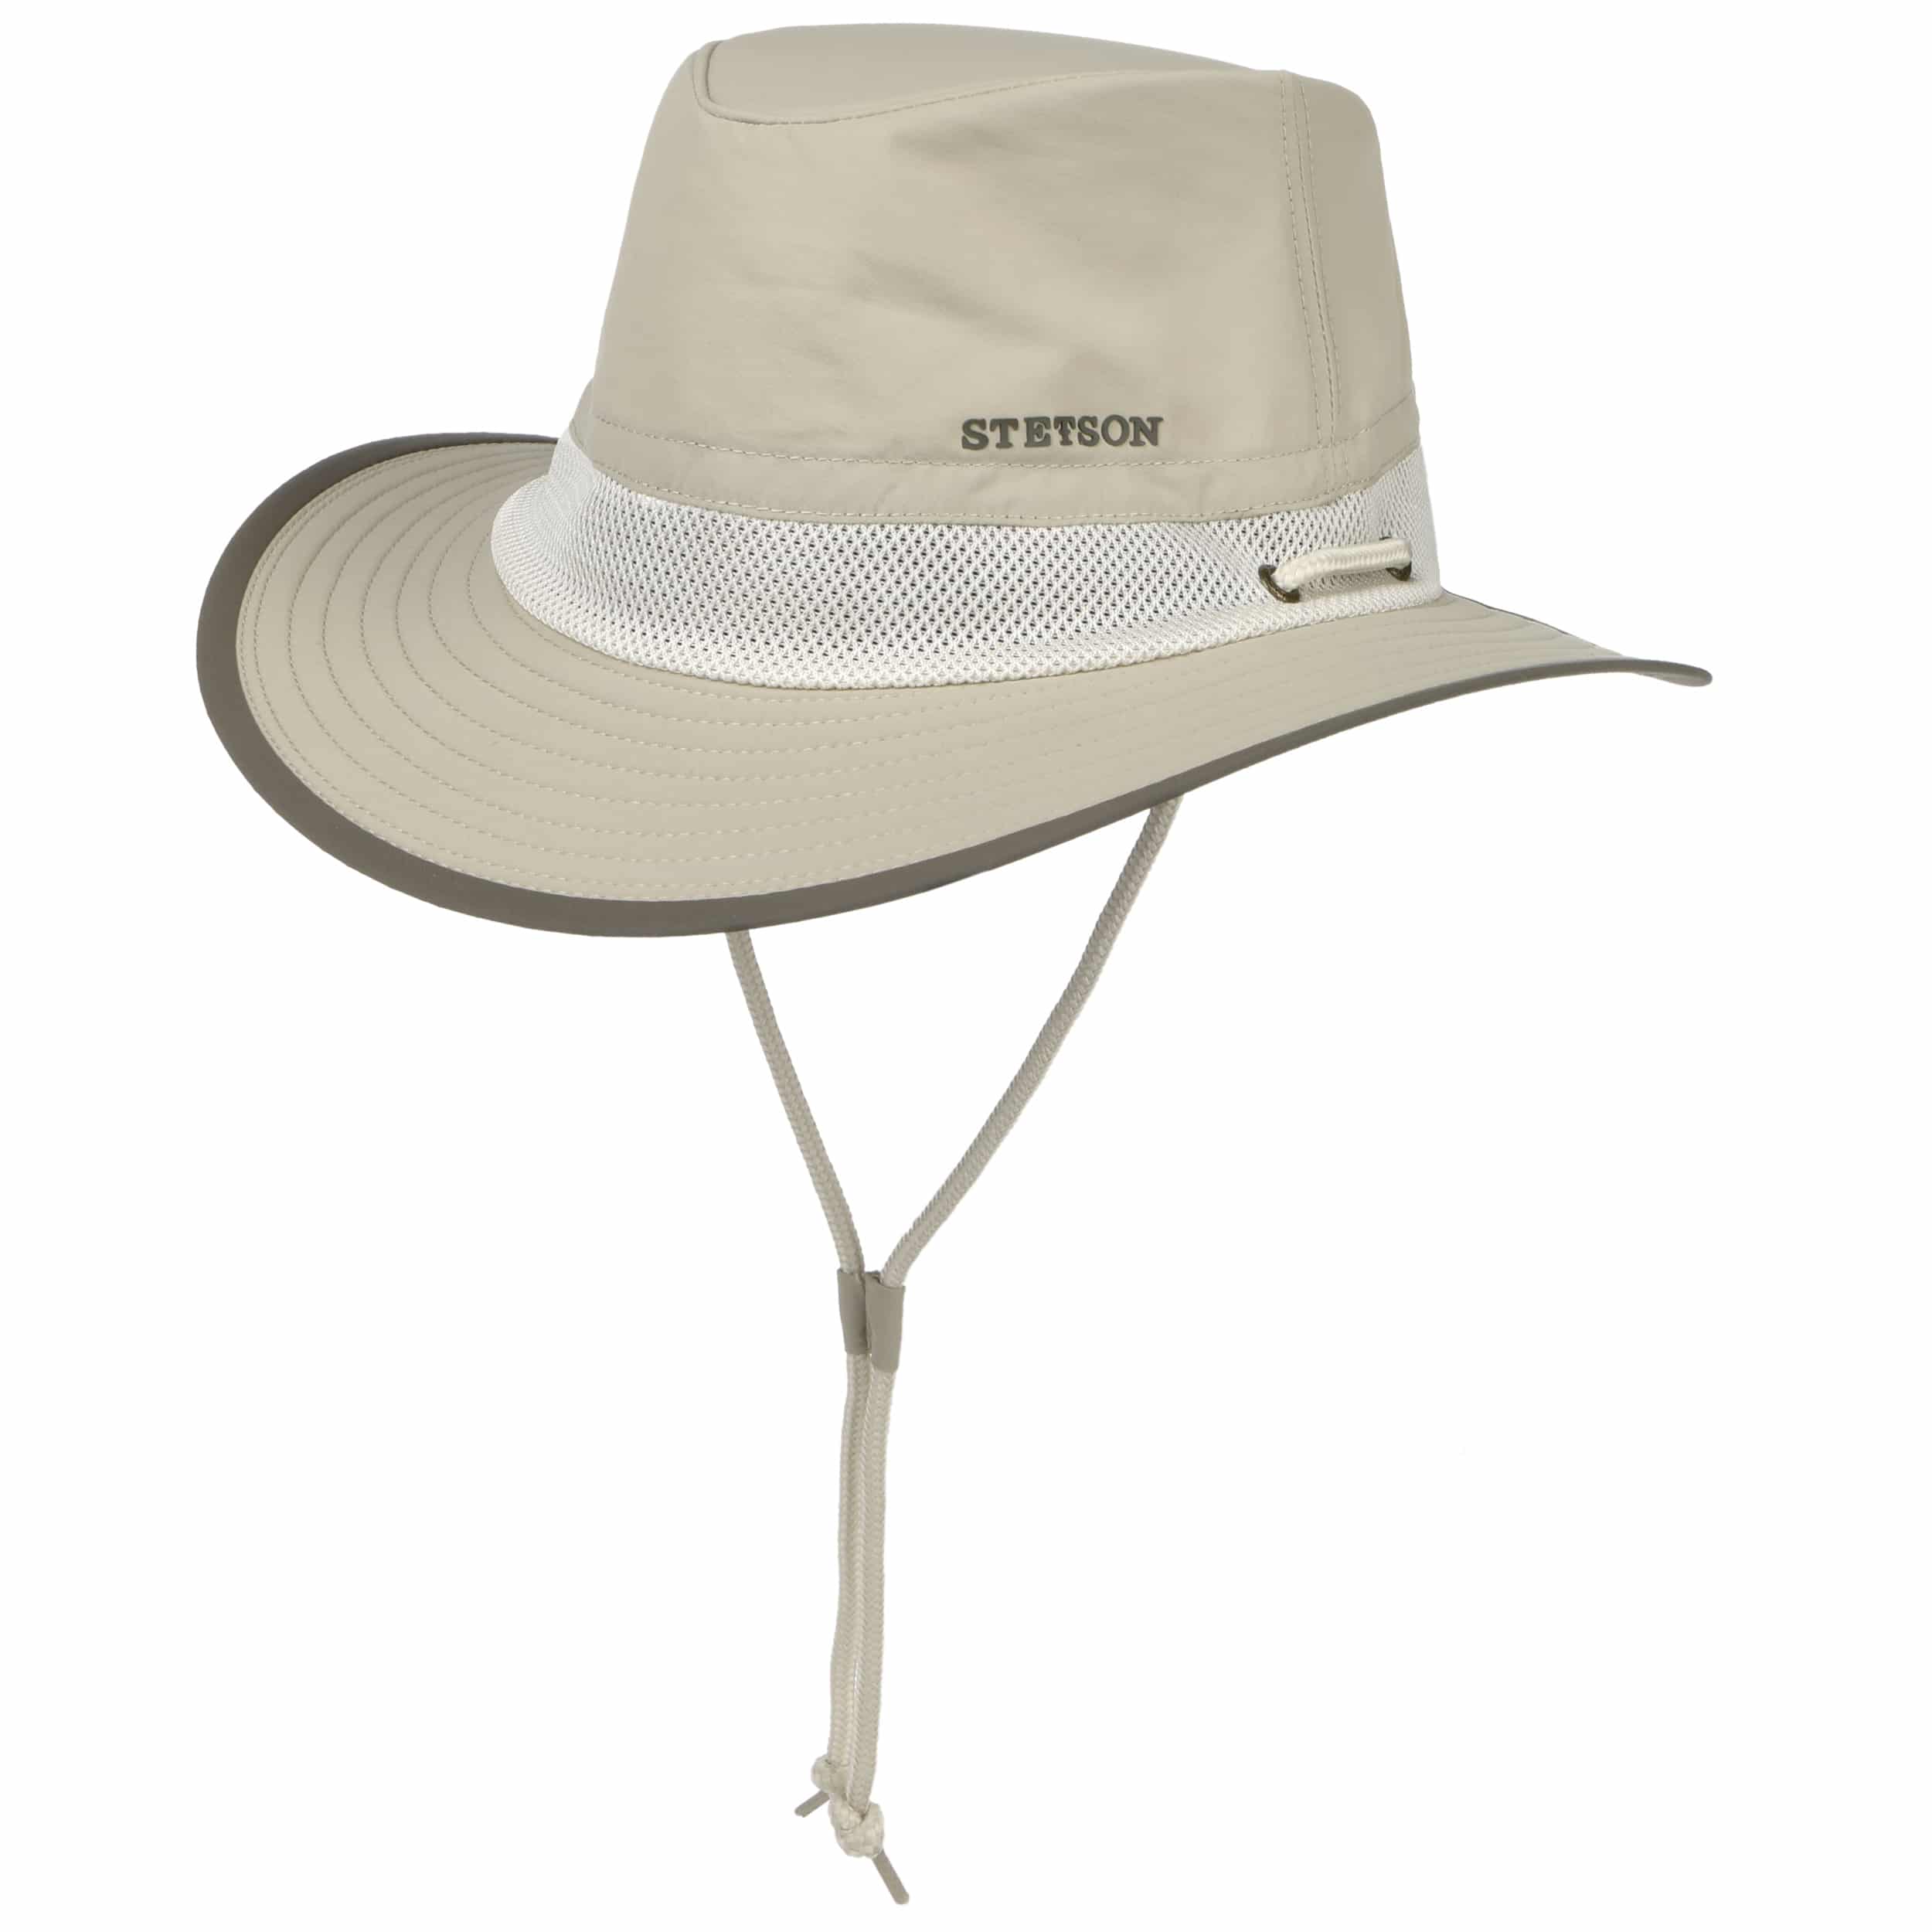 Keewatin Traveller Hat by Stetson - 89,00